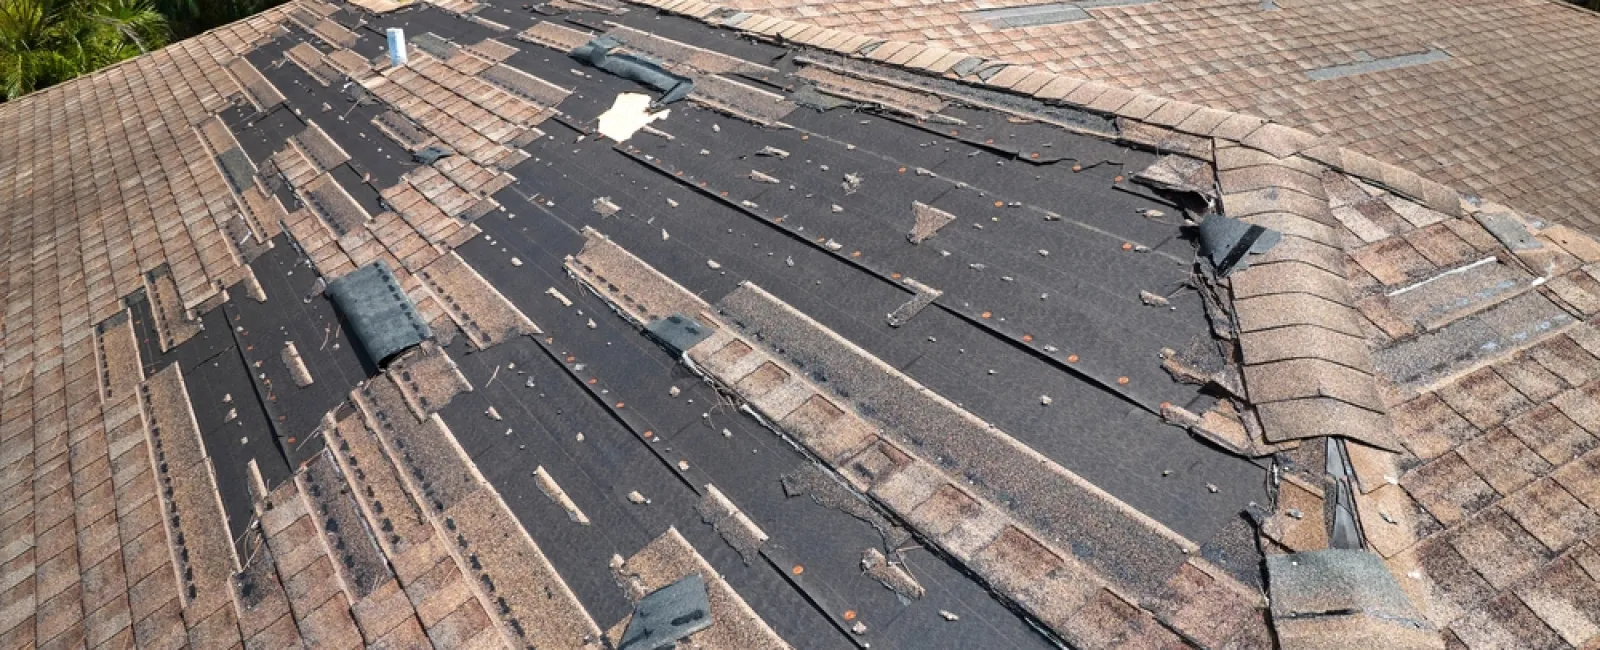 having a damaged roof has homeowners asking how to get insurance to pay for roof replacement